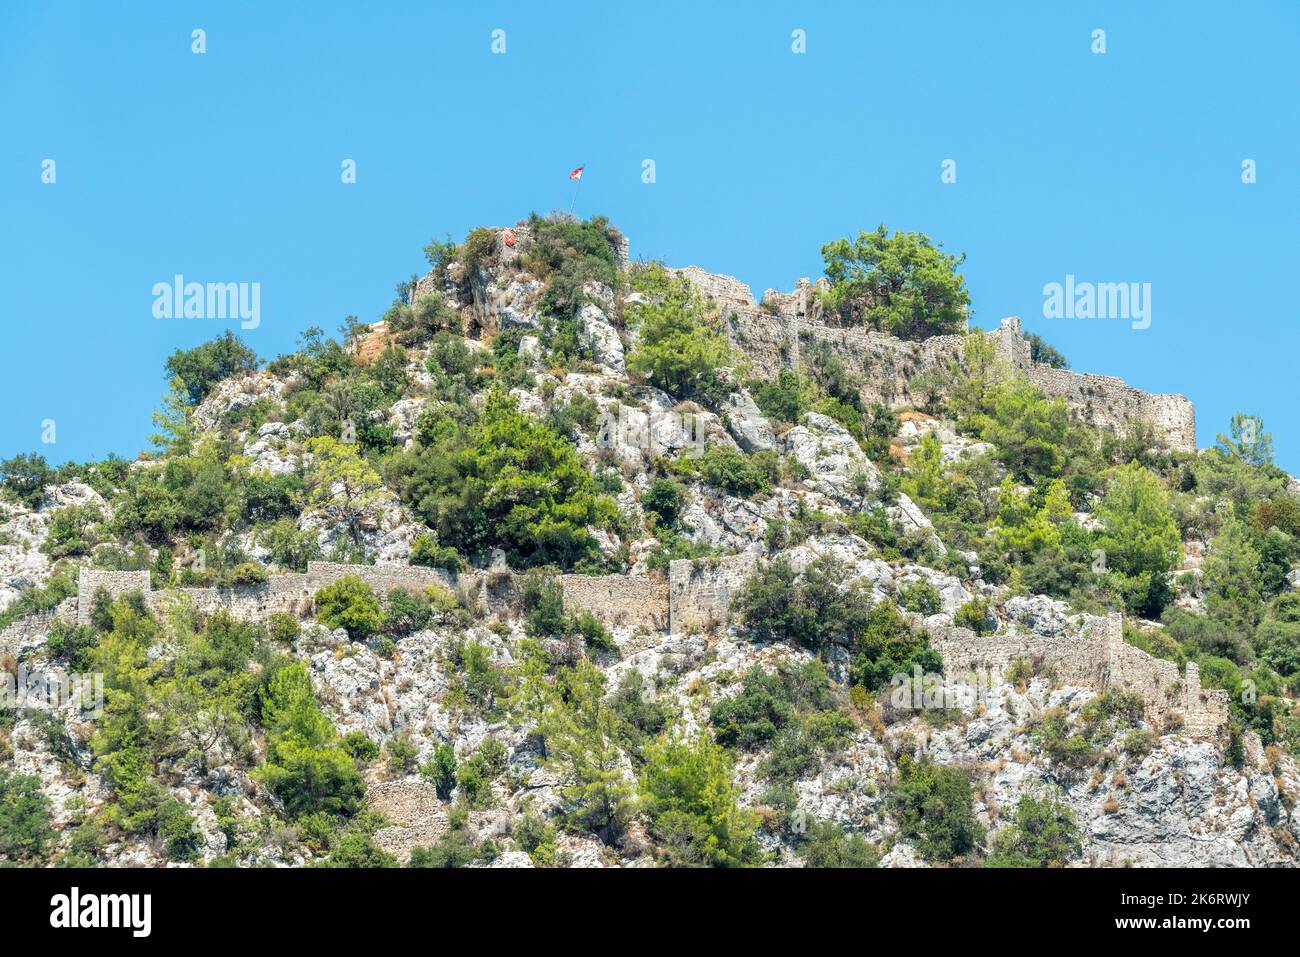 Ruins of Alara Castle sitting on a massive rocky hill in Alanya, Turkey. The castle dates from the 13th century. Stock Photo